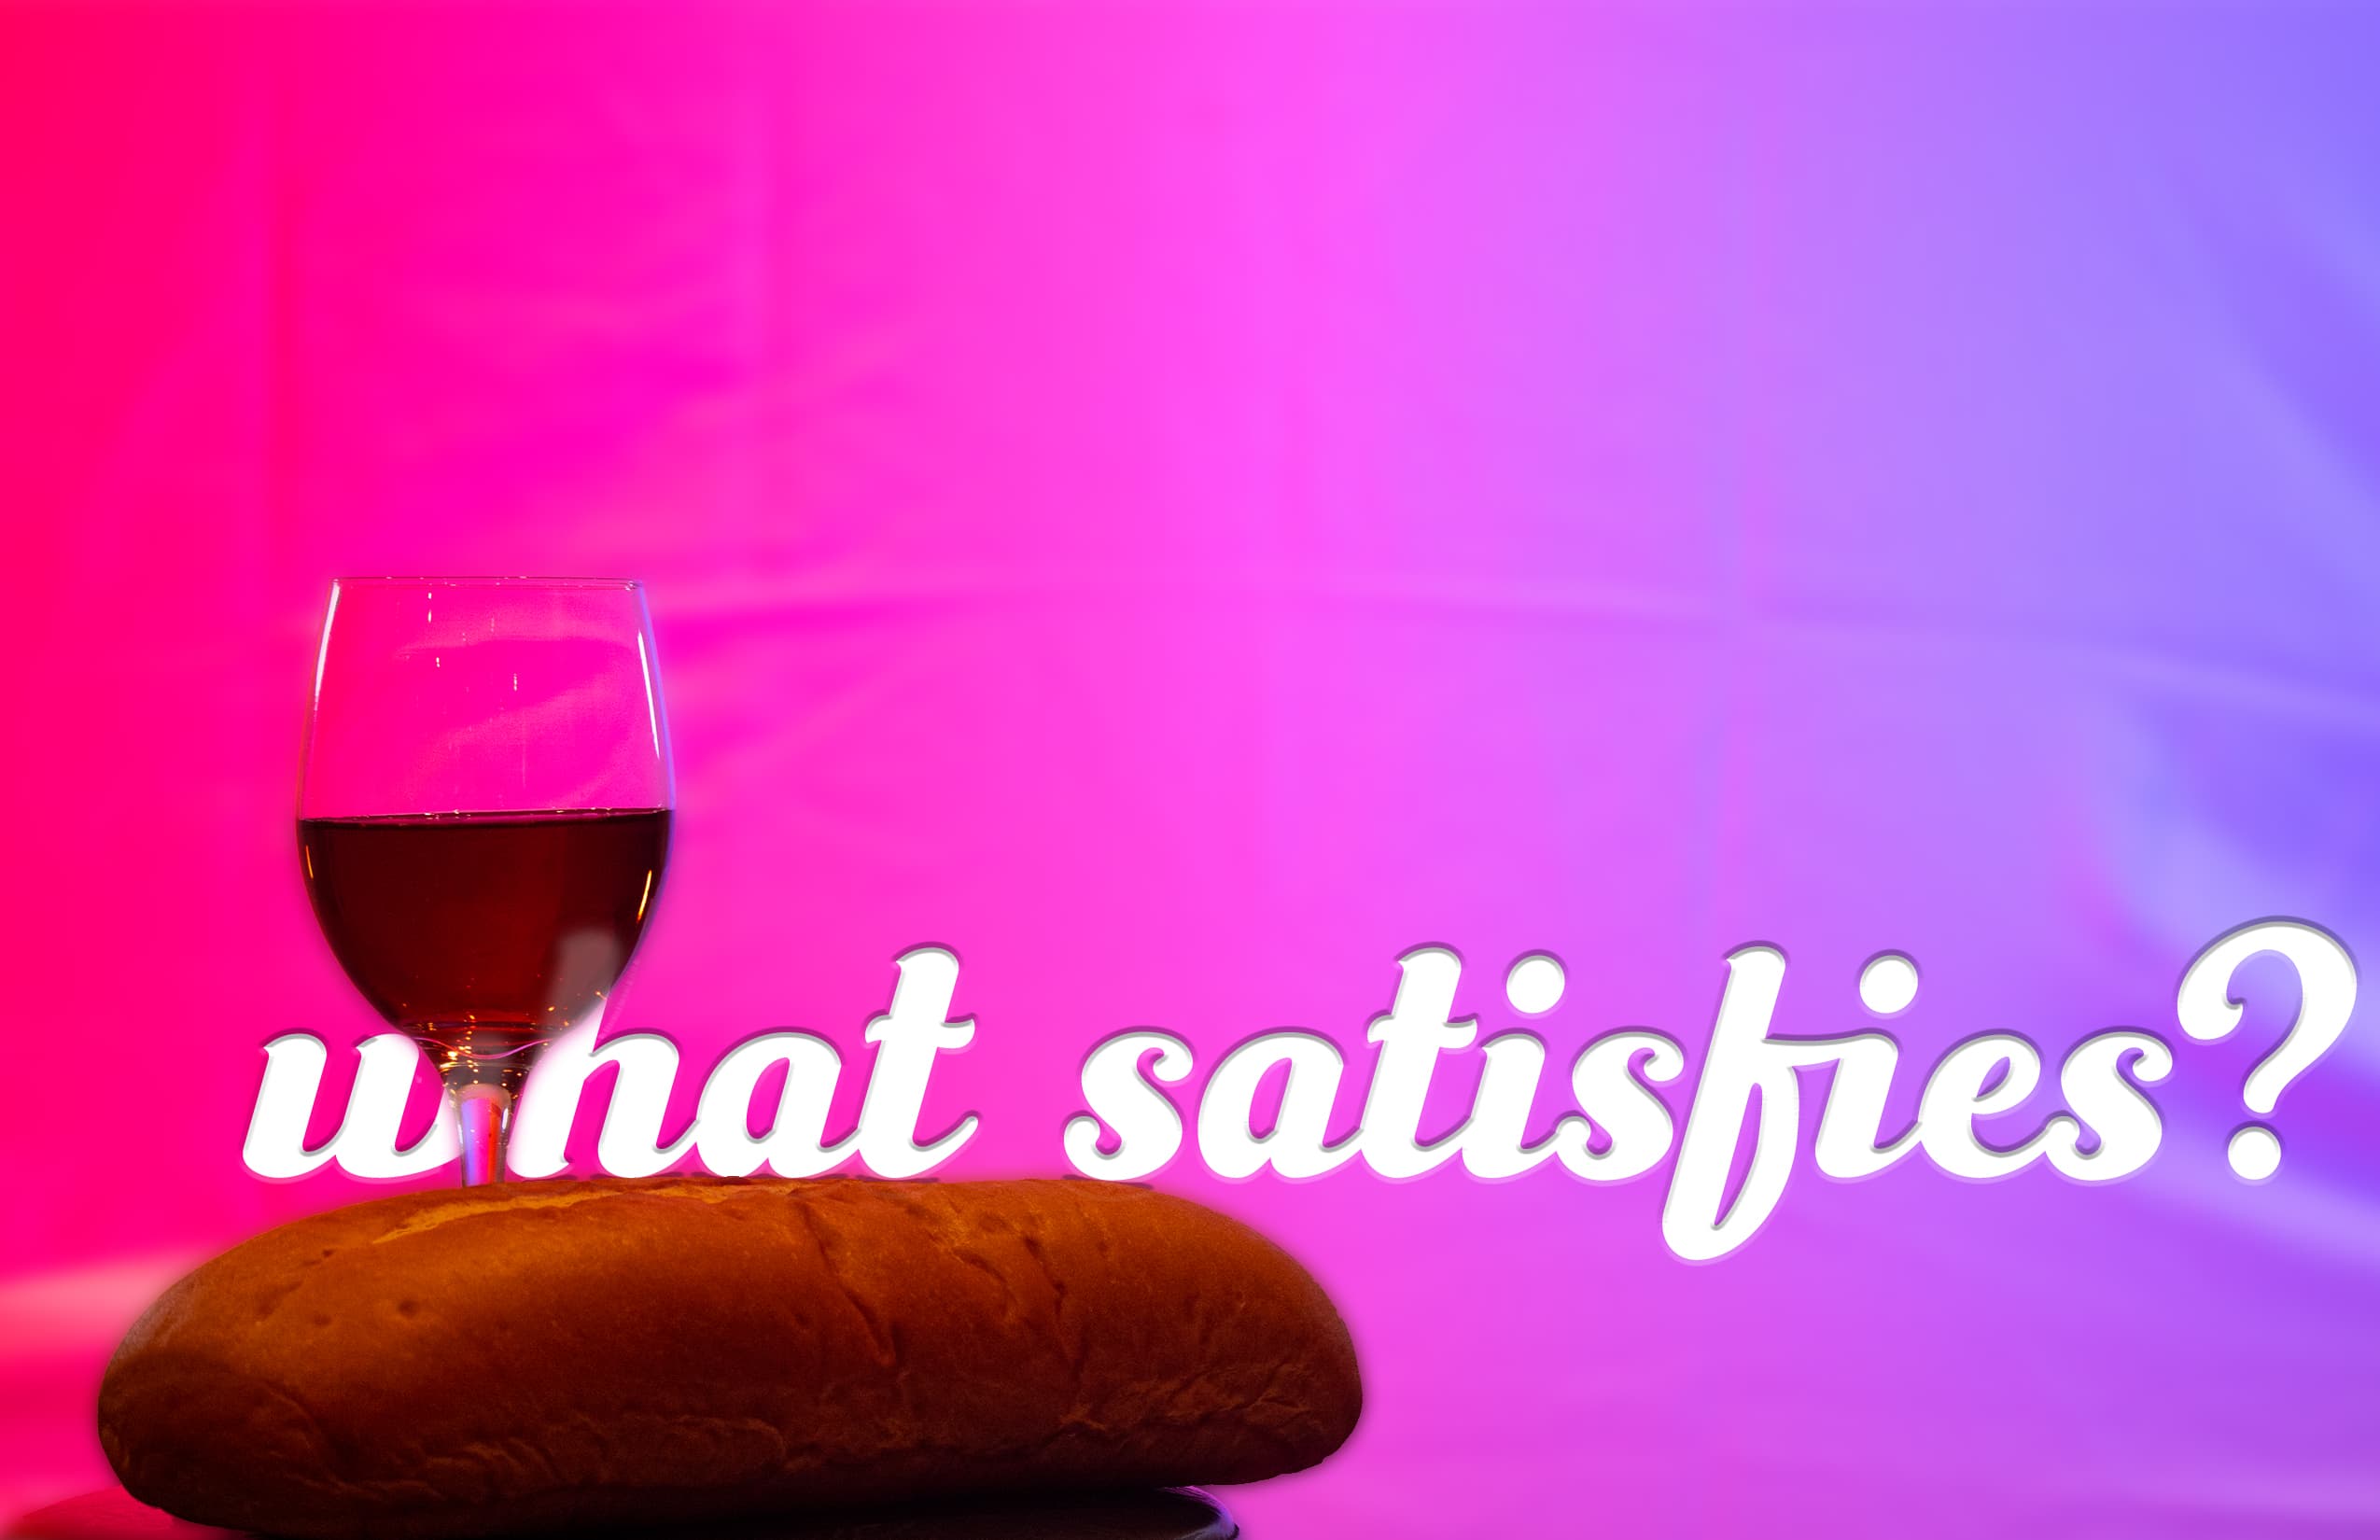 Featured image for “What Satisfies?”